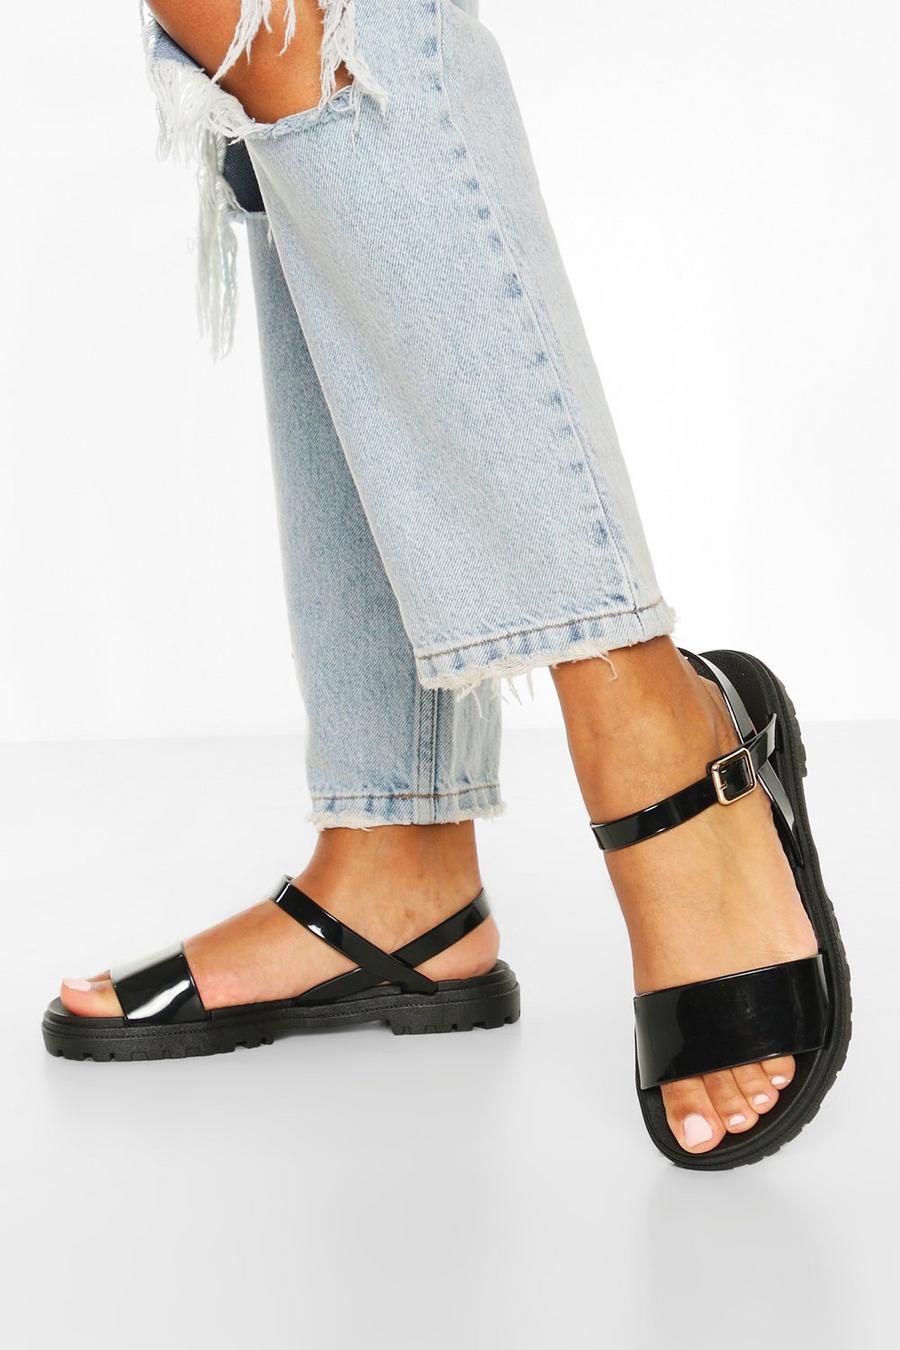 Black Cleated 2 Part Sandals